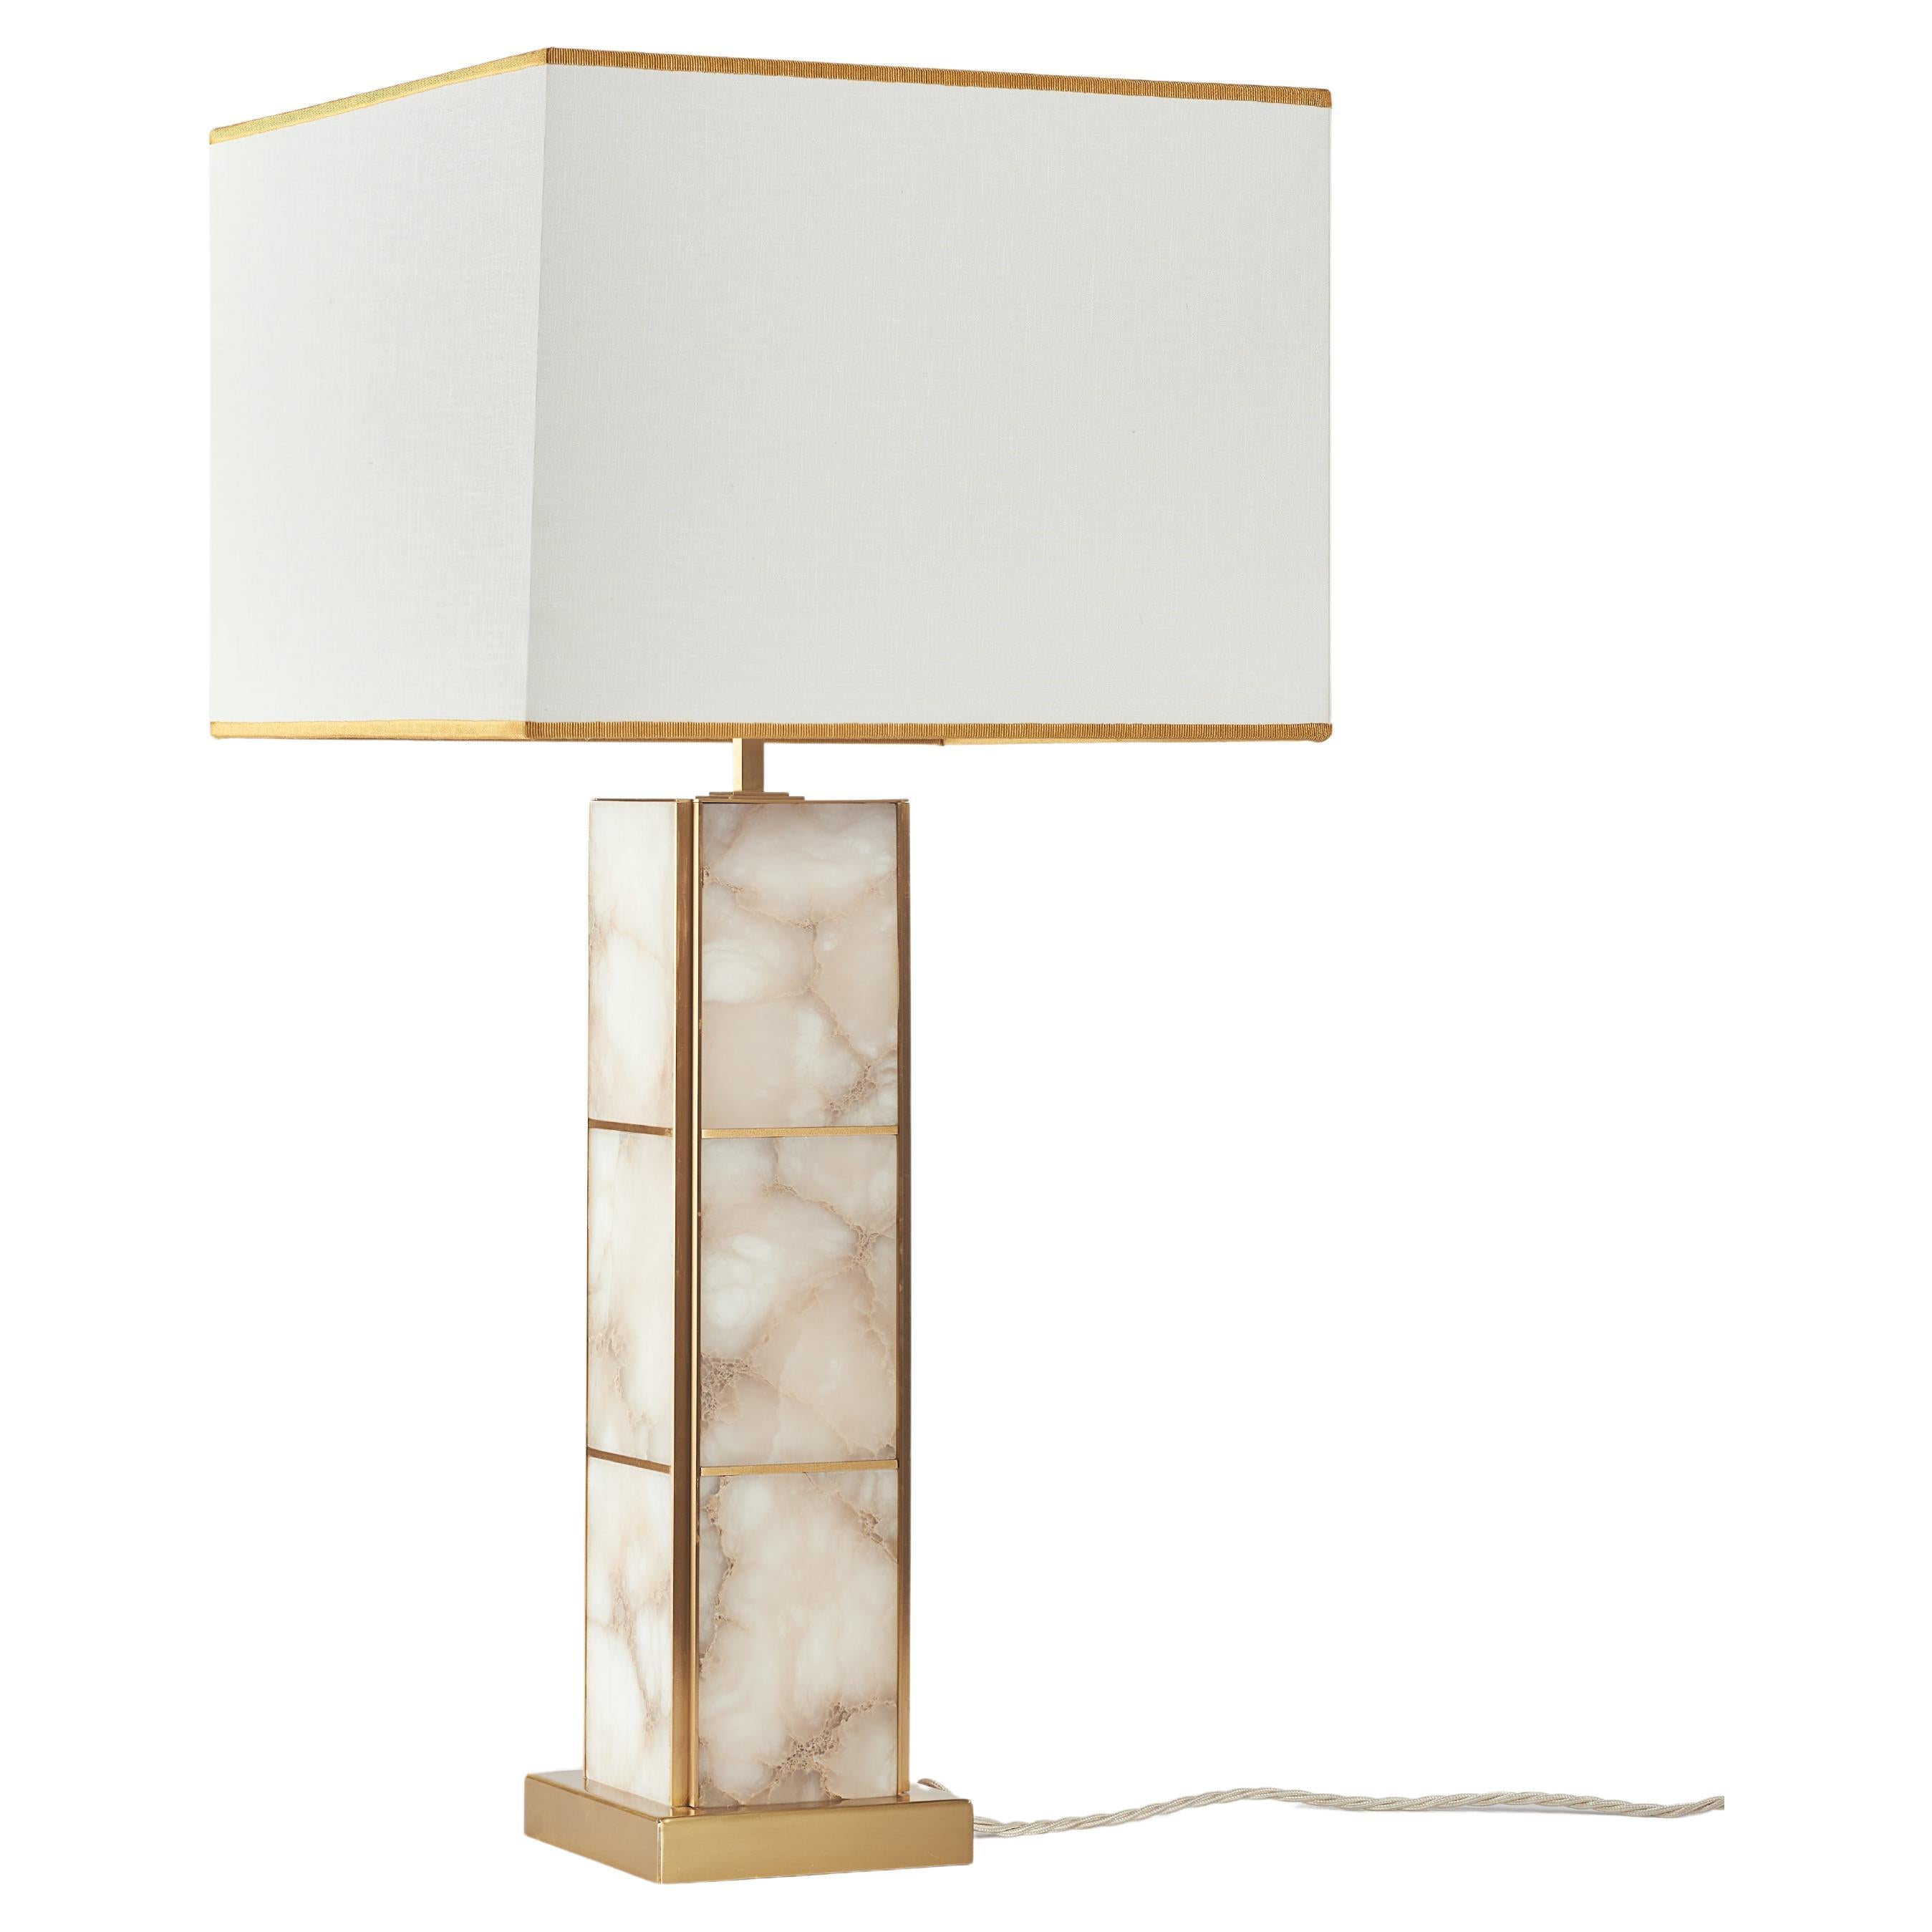 Elegant Linear Italian Table Lamp "Mole", Satin Brass and Alabaster For Sale